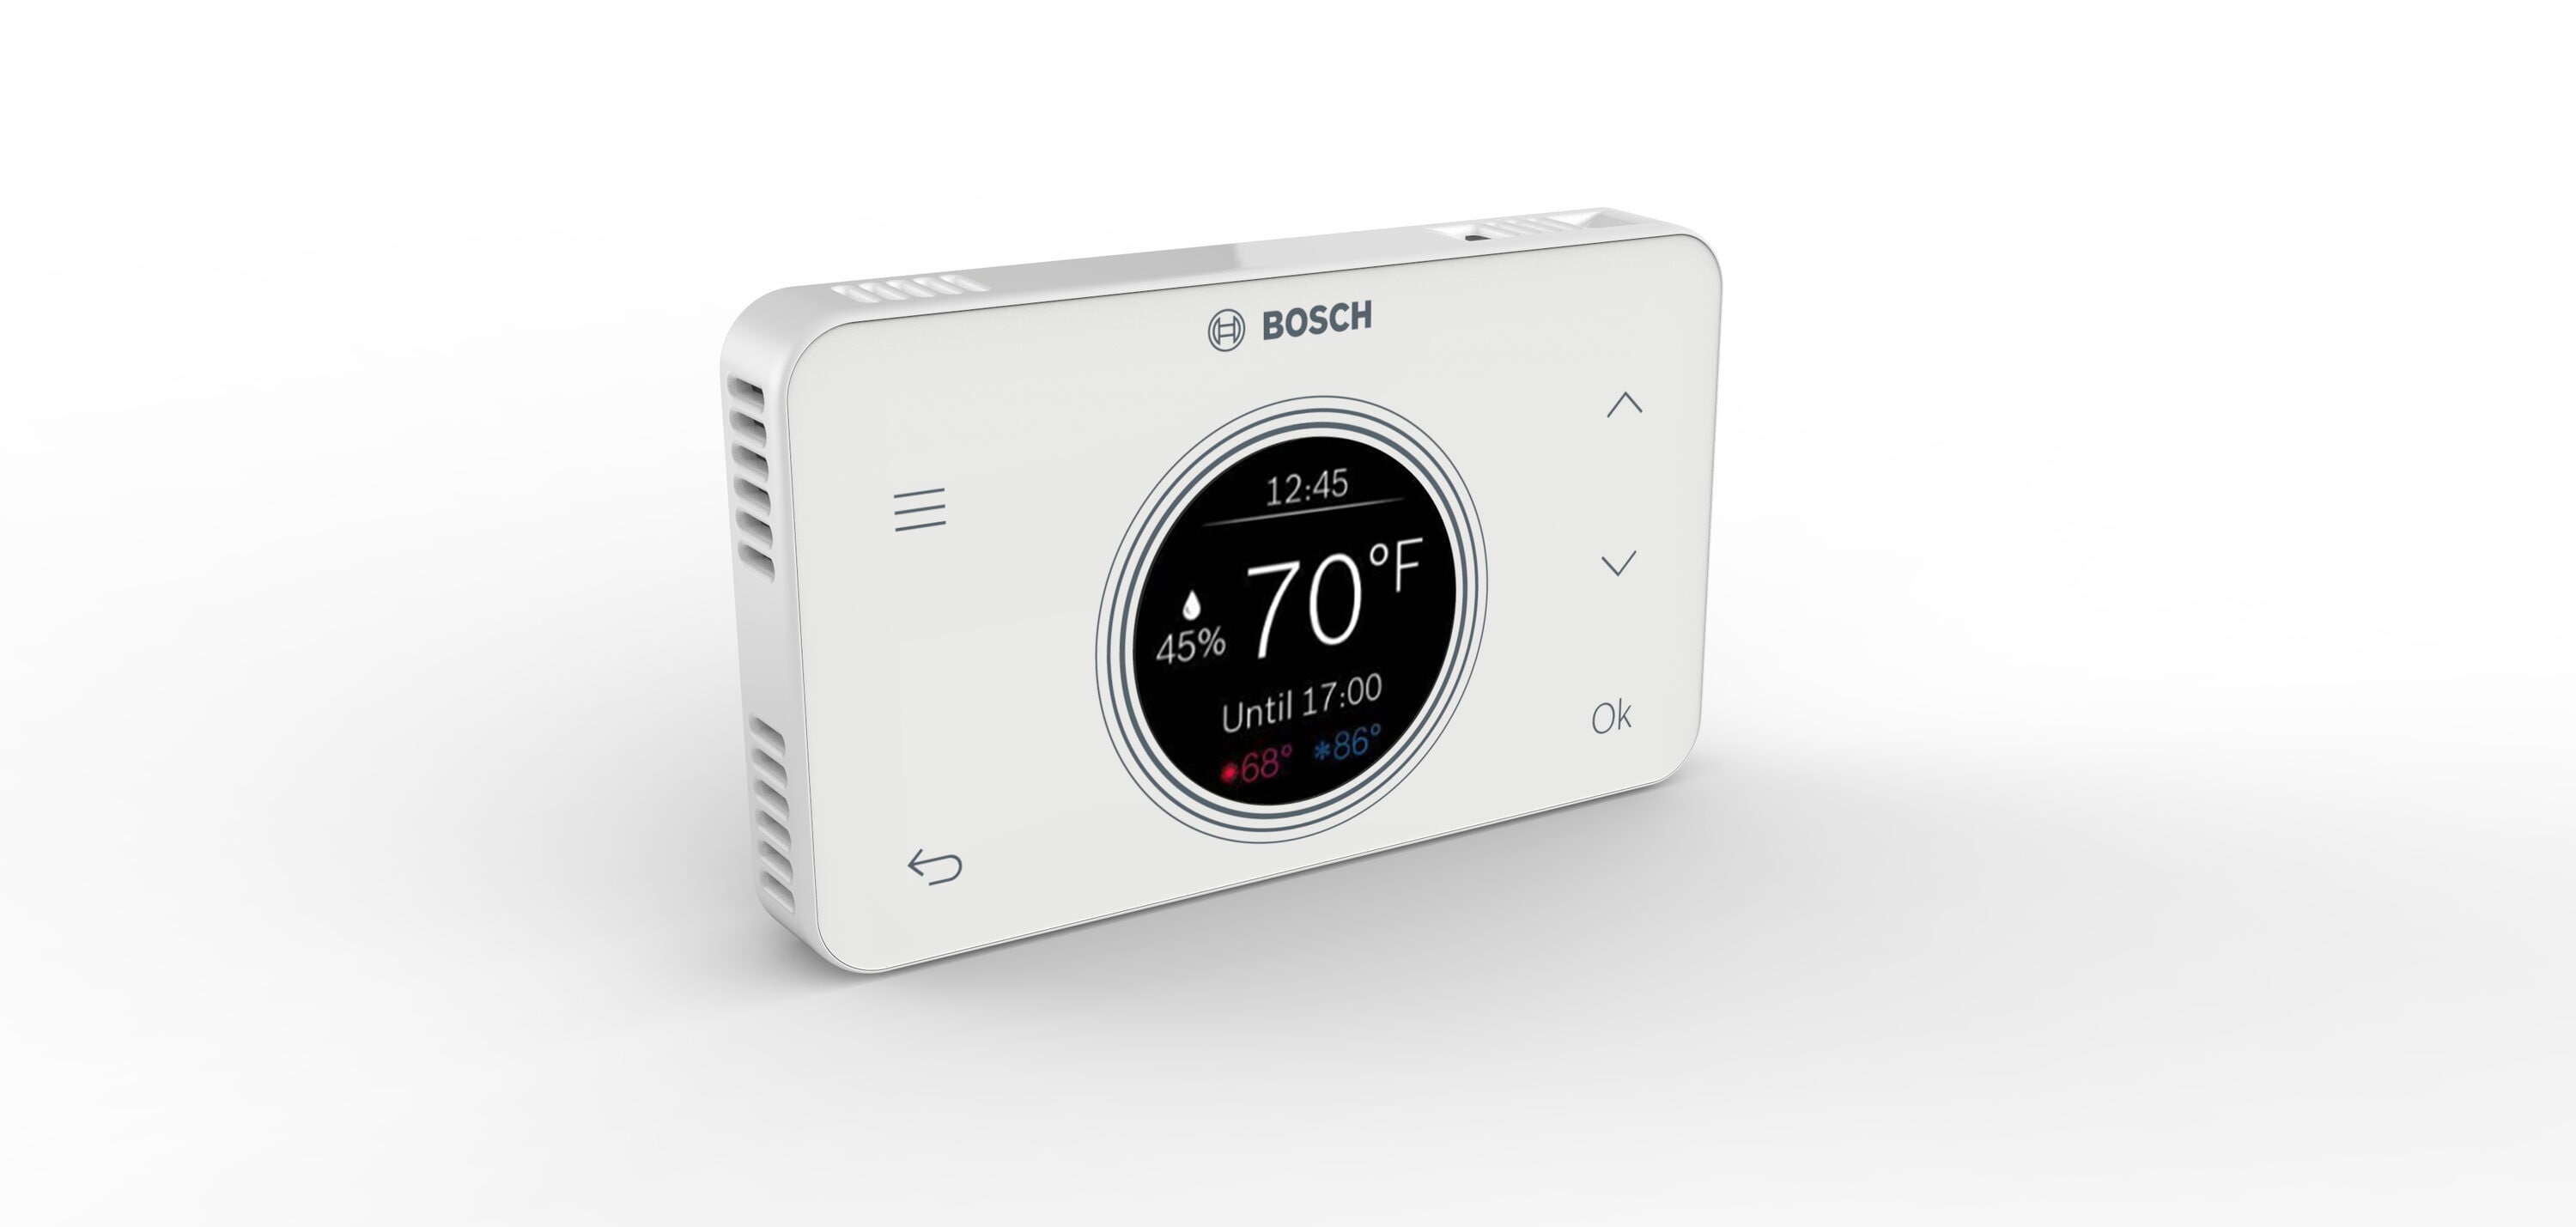 Bosch White with Wi-Fi Compatibility the Smart Thermostats at Lowes.com